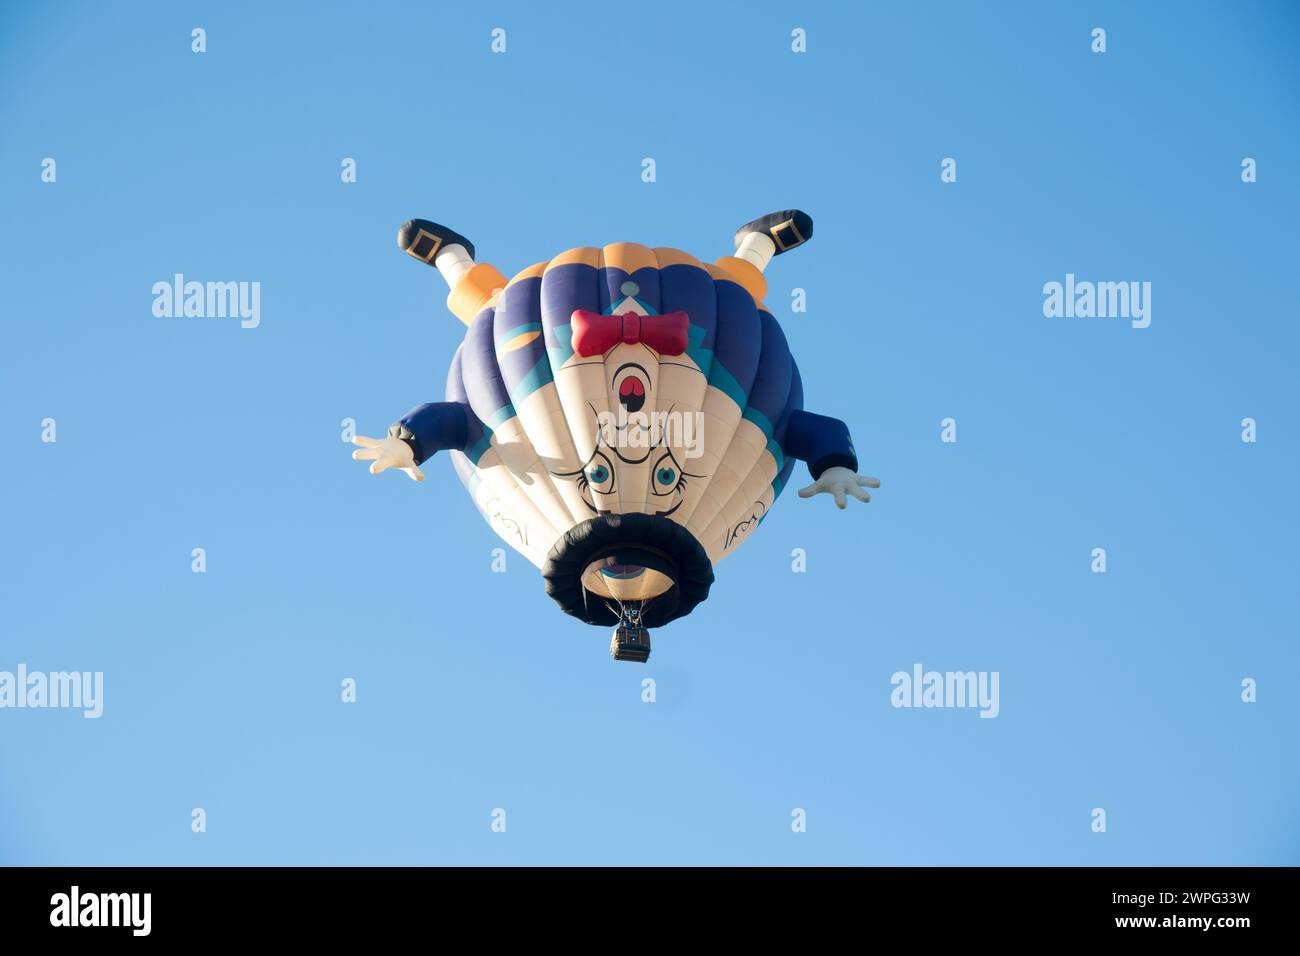 Funny, humorous hot air balloon of Humpty Dumpty nursery rhyme flying against blue sky in  Albuquerque, New Mexico. Stock Photo